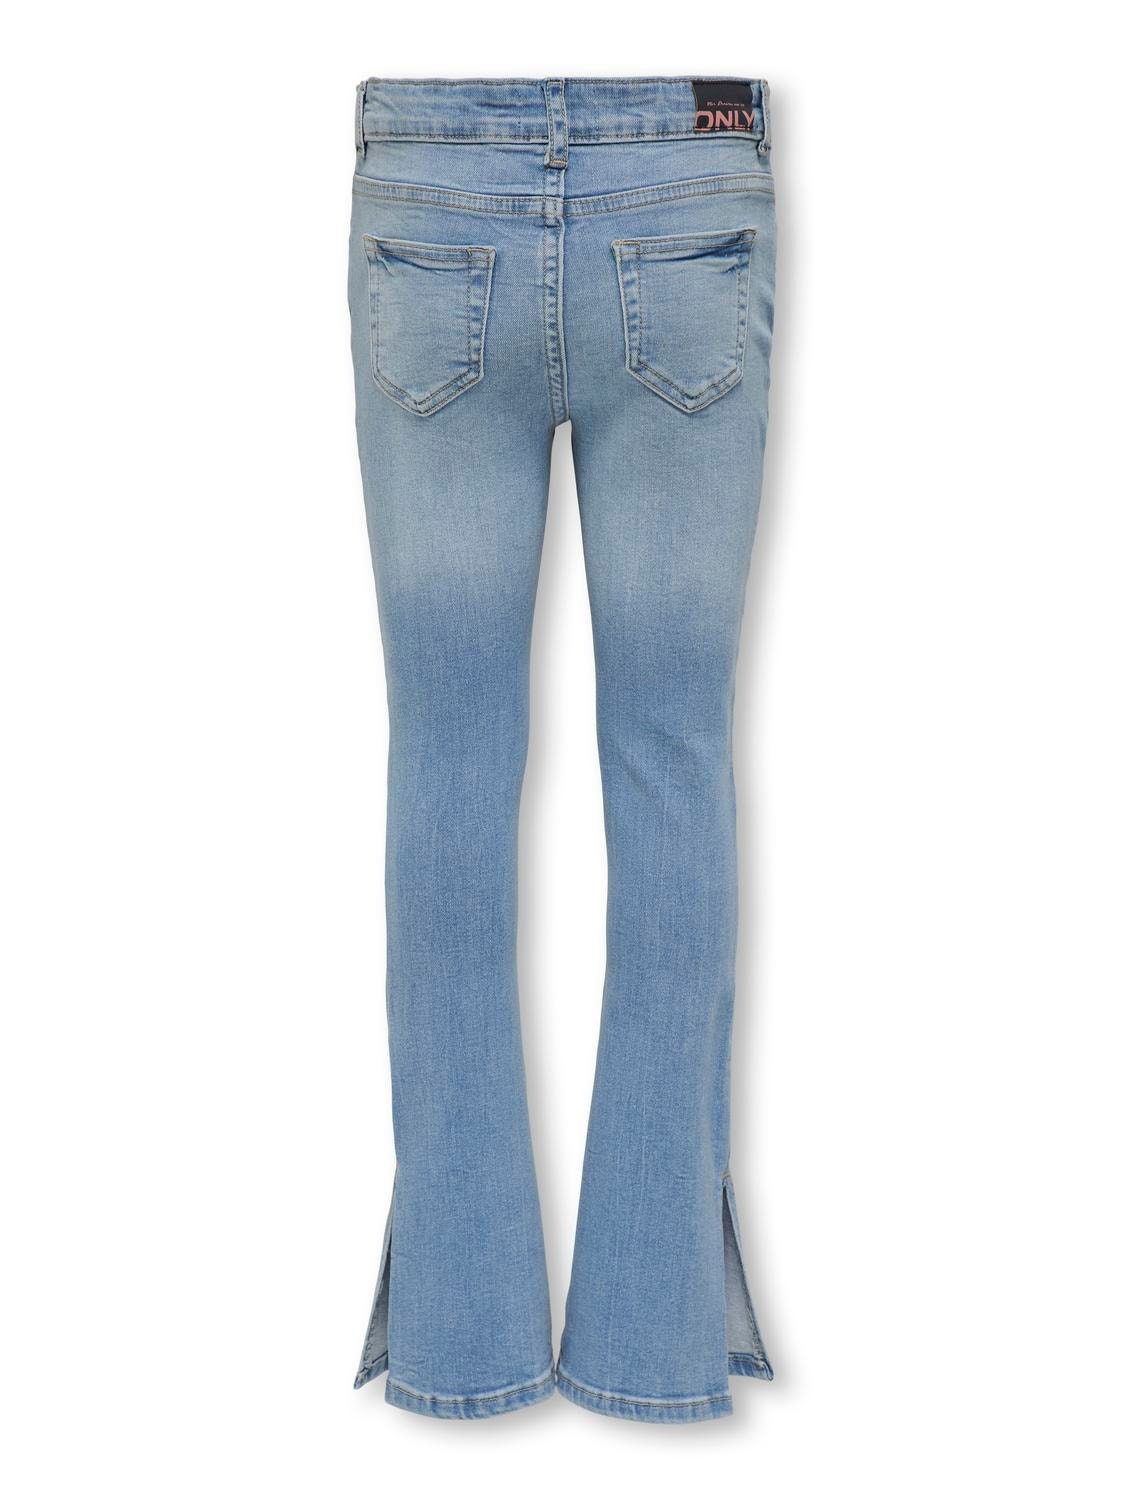 ONLY Jeans Flared Fit Spacchetti laterali -Light Blue Denim - 15284463